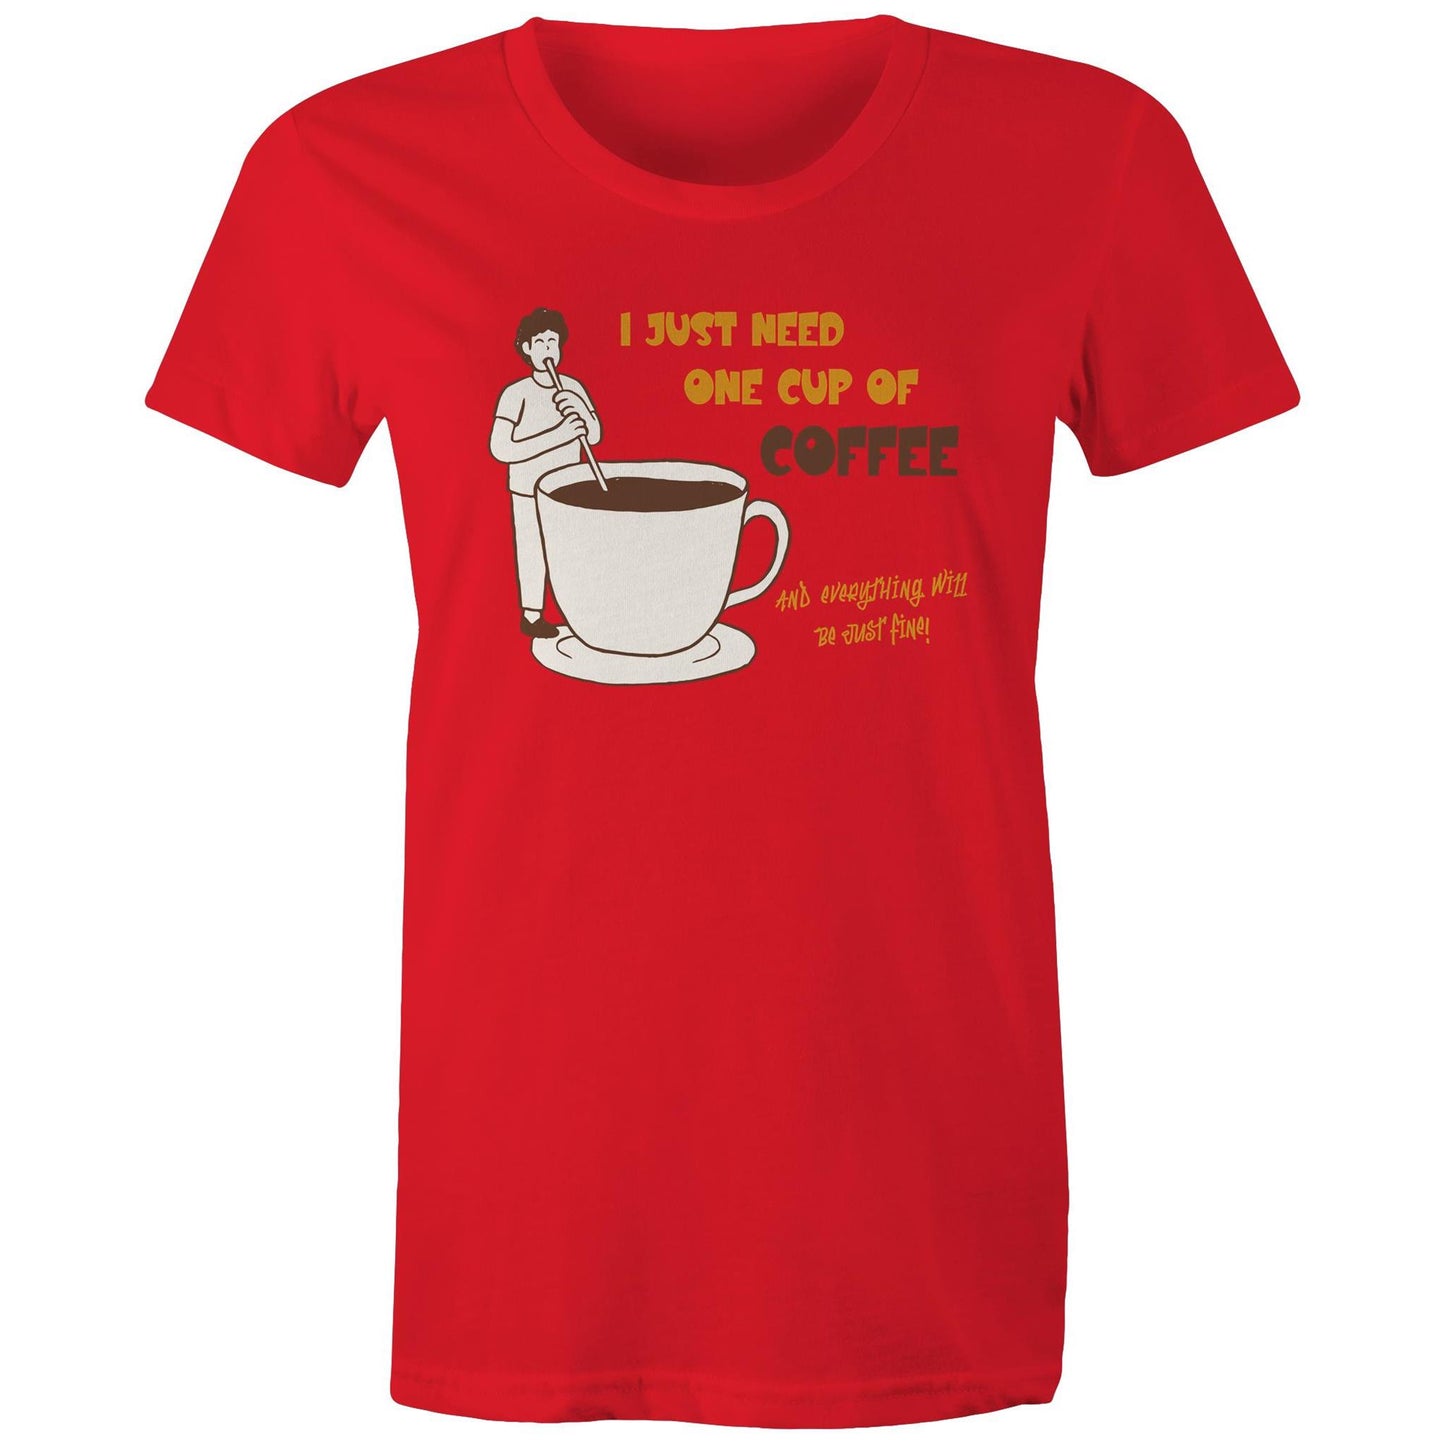 I Just Need One Cup Of Coffee And Everything Will Be Just Fine - Womens T-shirt Red Womens T-shirt Coffee